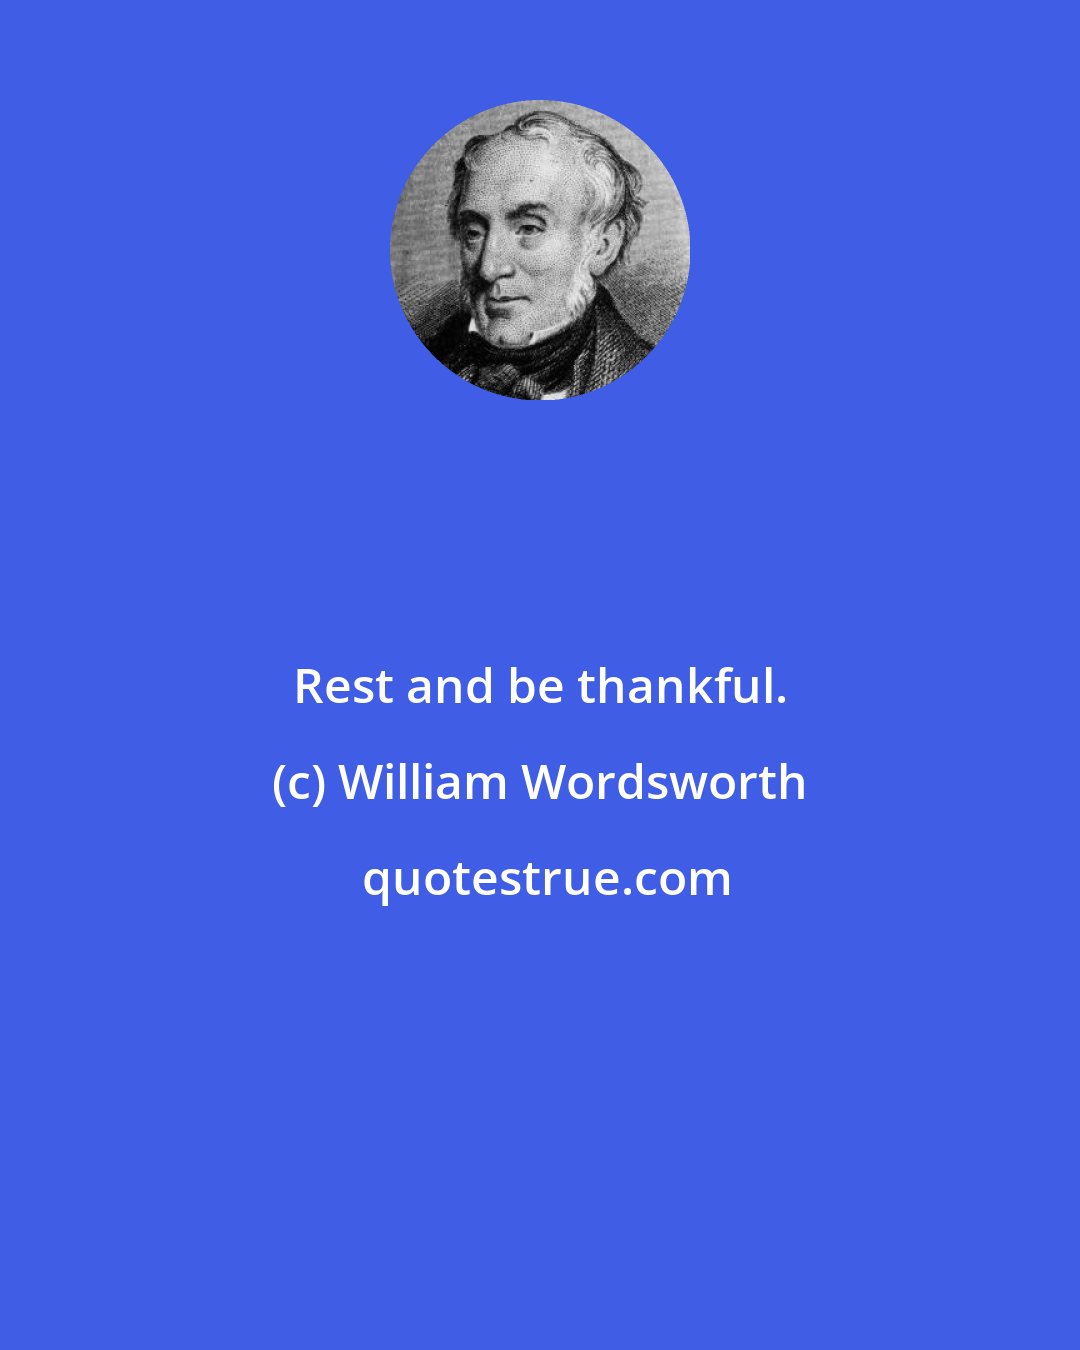 William Wordsworth: Rest and be thankful.